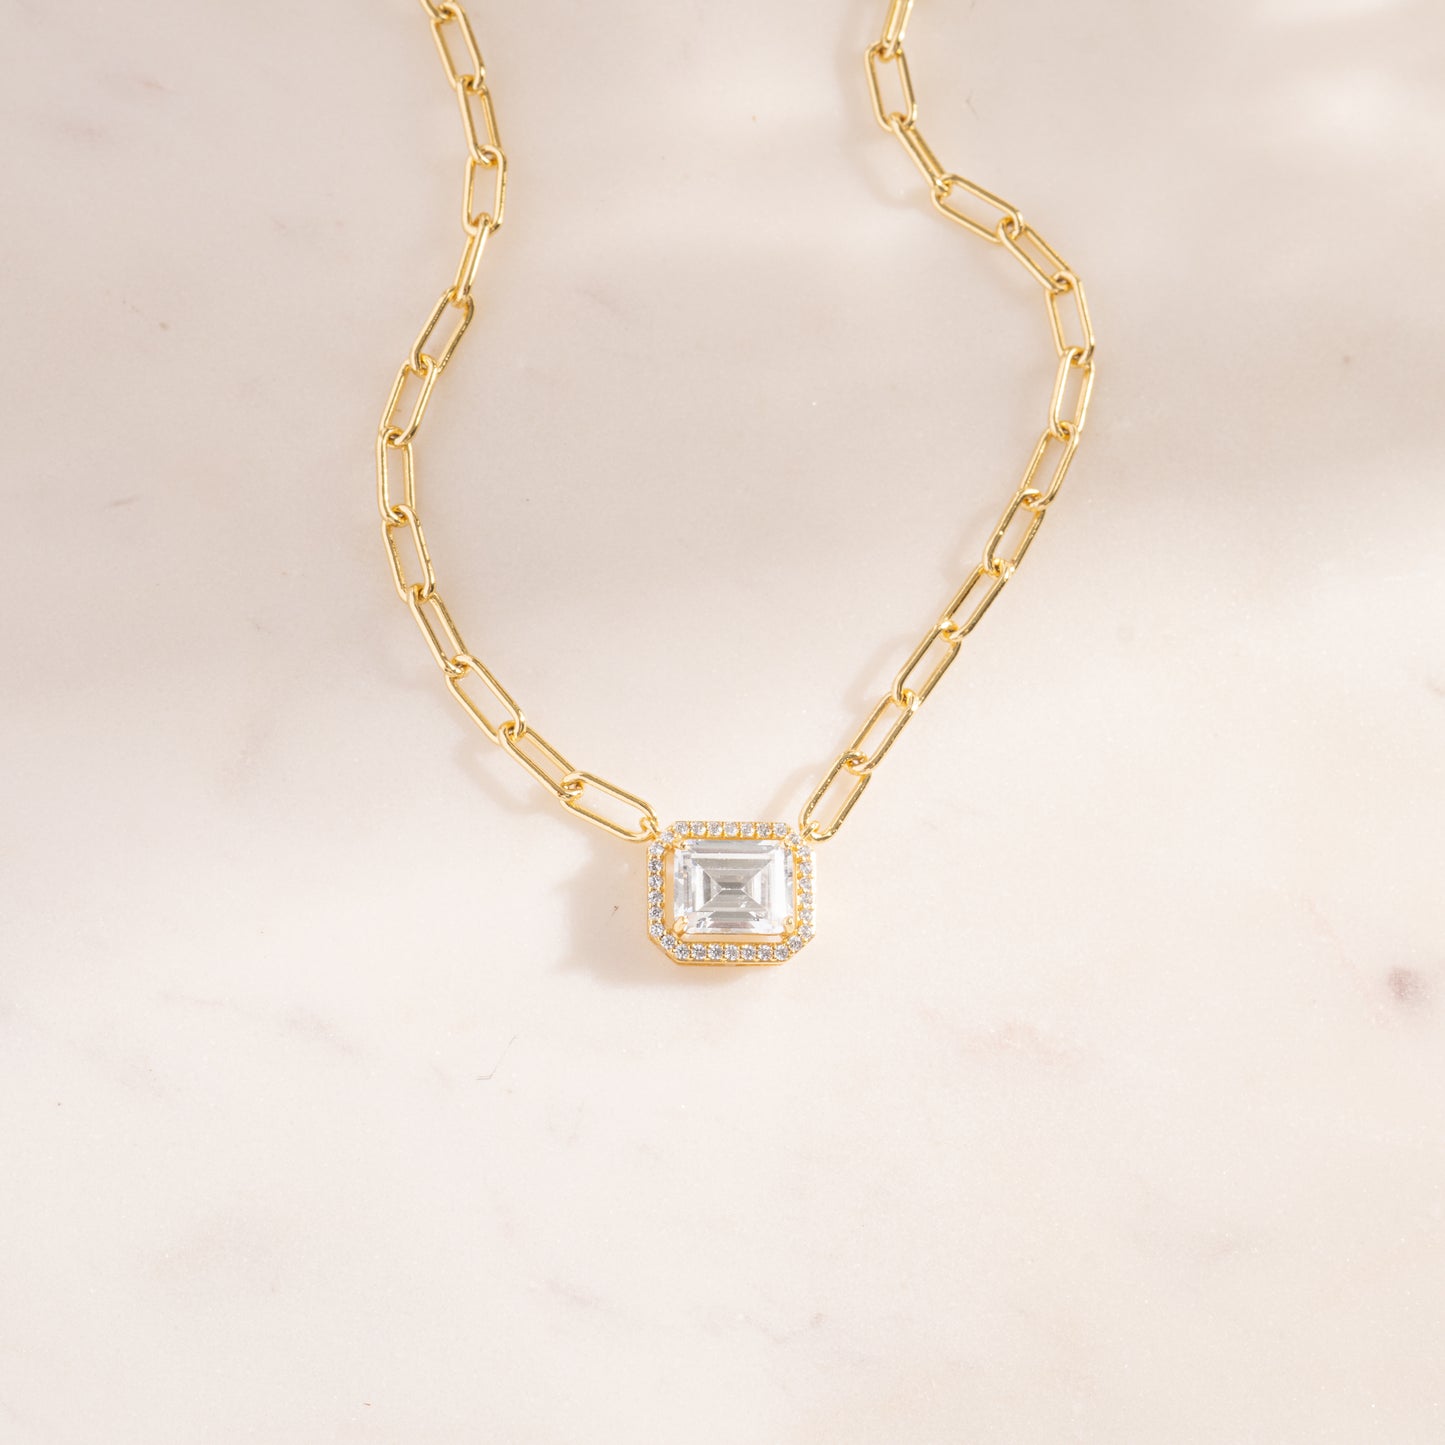 a gold necklace with a square cut stone on a chain